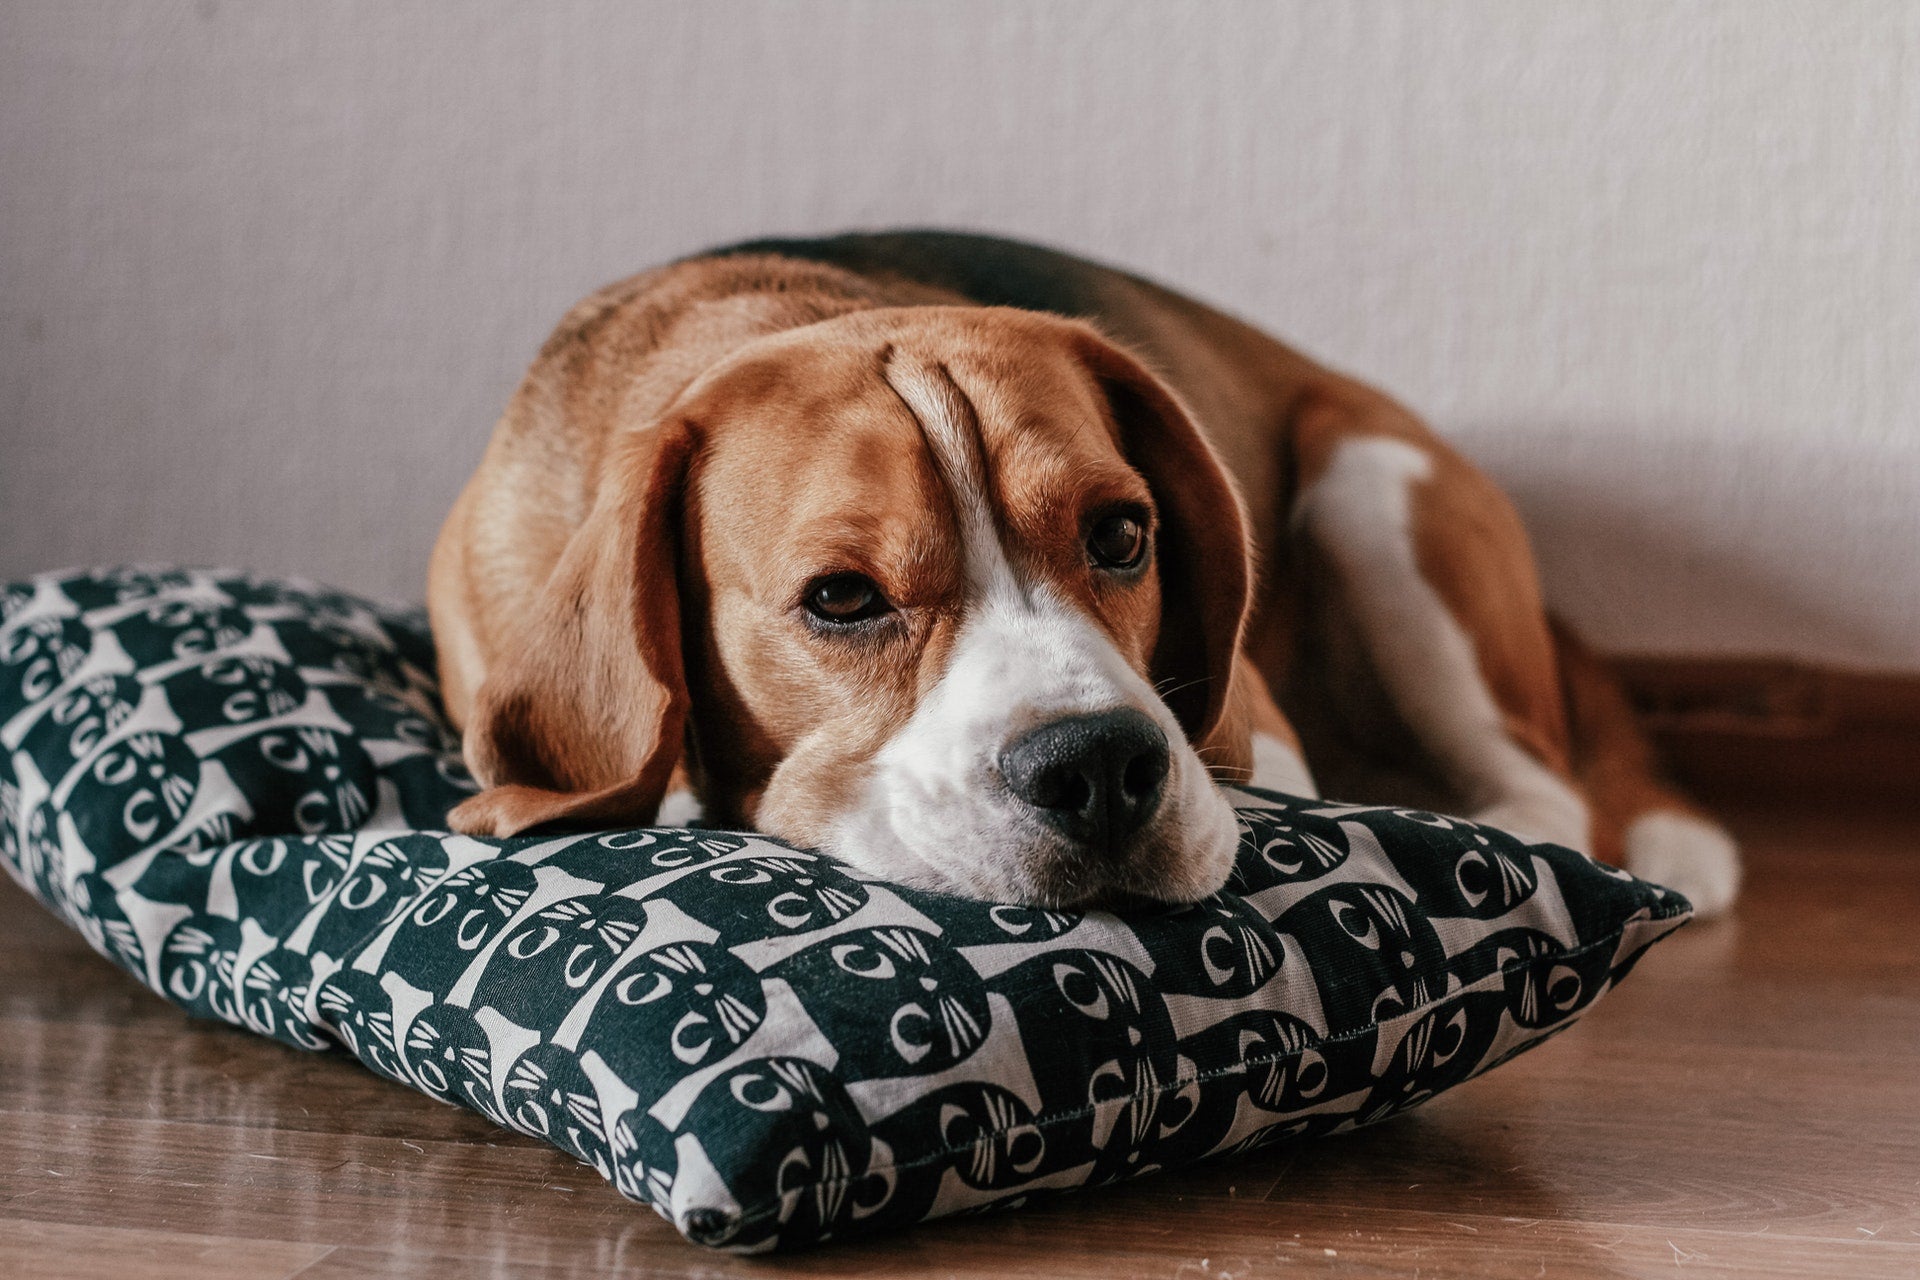 8 Ways to Keep Your Dog Busy While You're at Work 